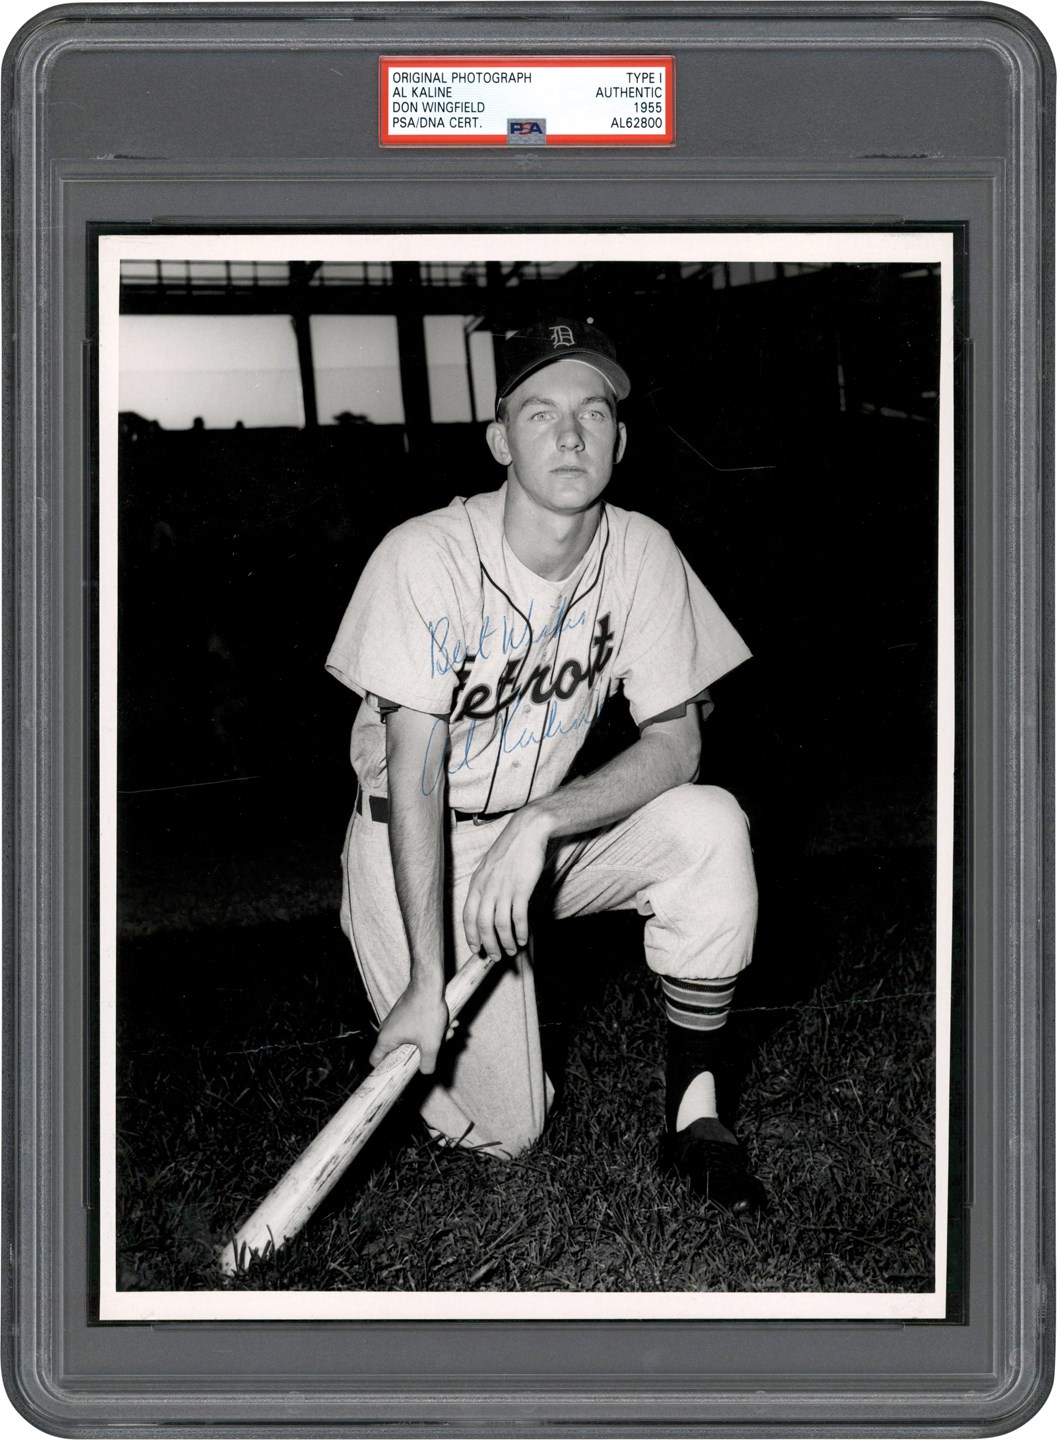 - Stunning 1955 Al Kaline Signed Photograph by Don Wingfield (PSA Type I)